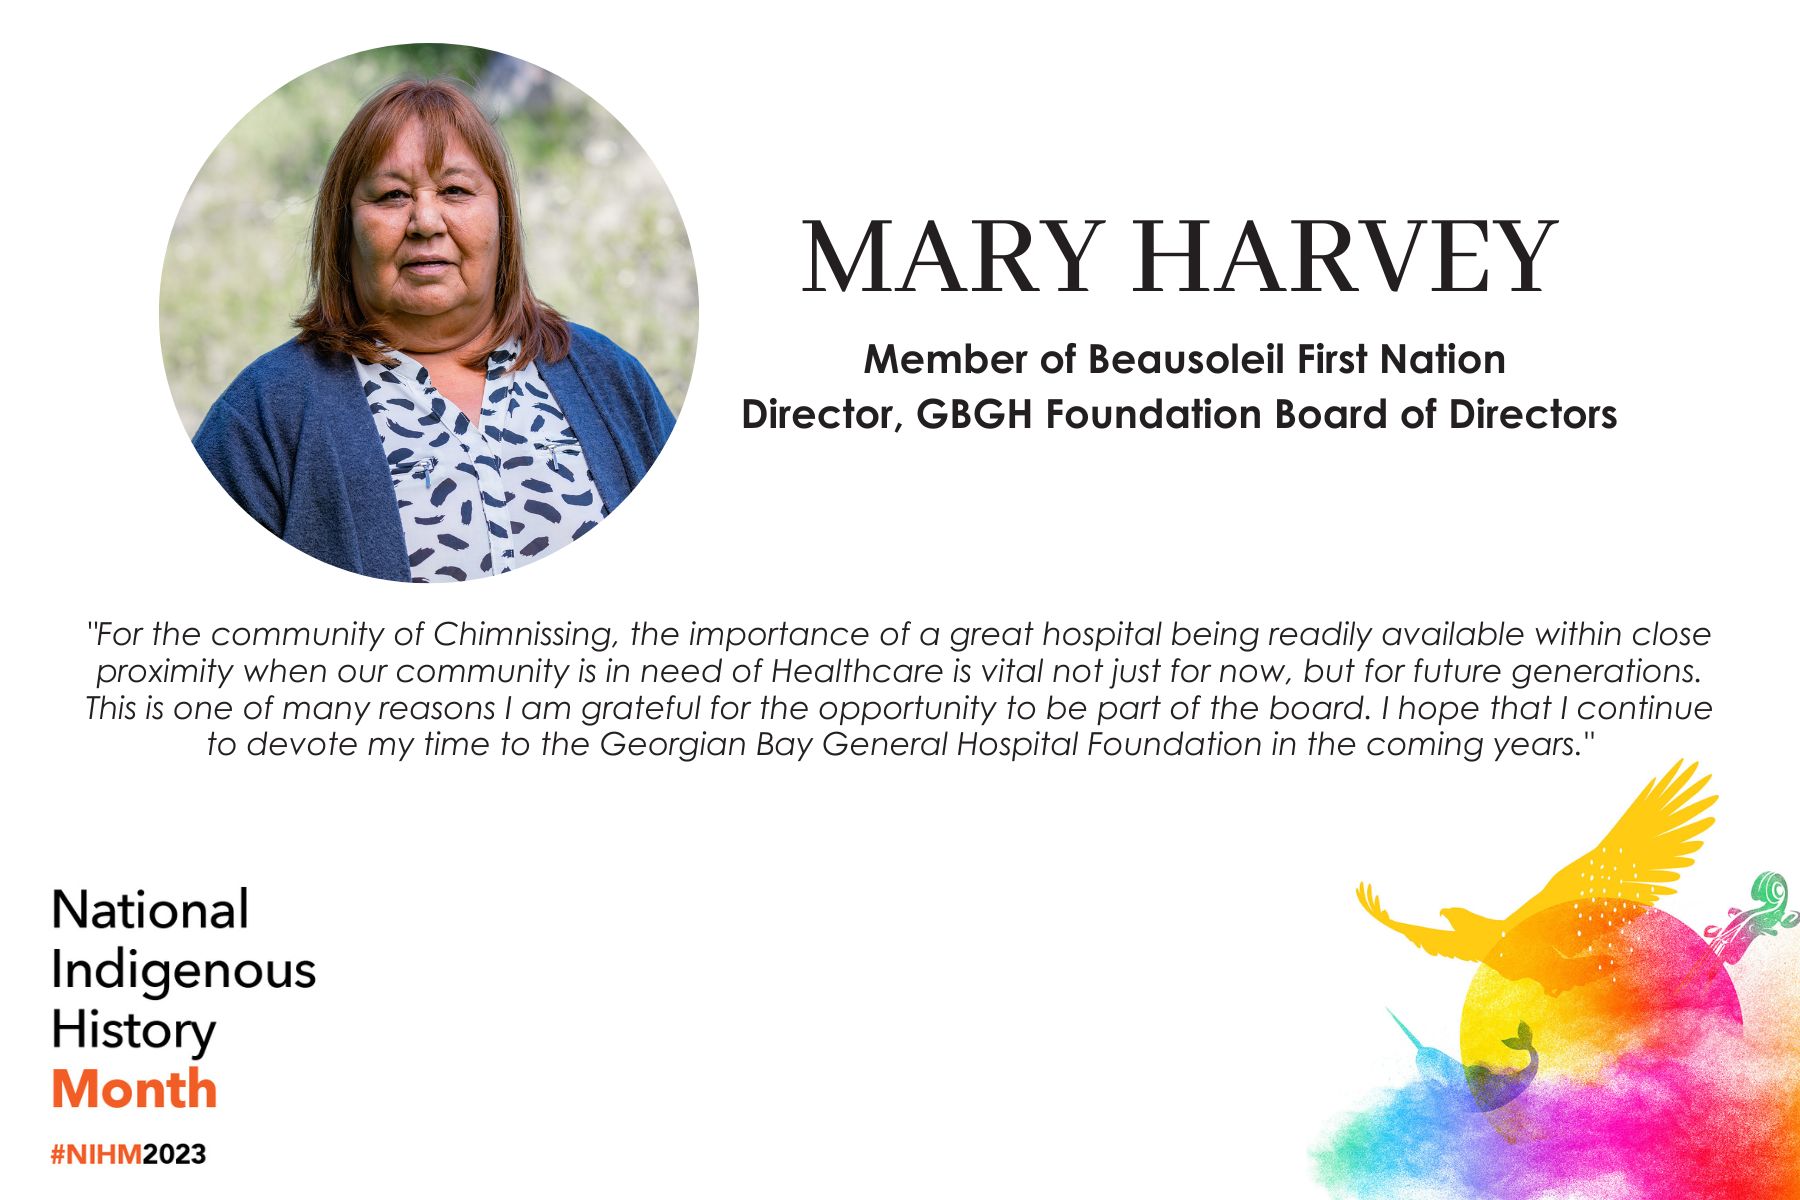 Mary Harvey - member of Beausoleil first nation, Director, GBGH Foundation board of directors